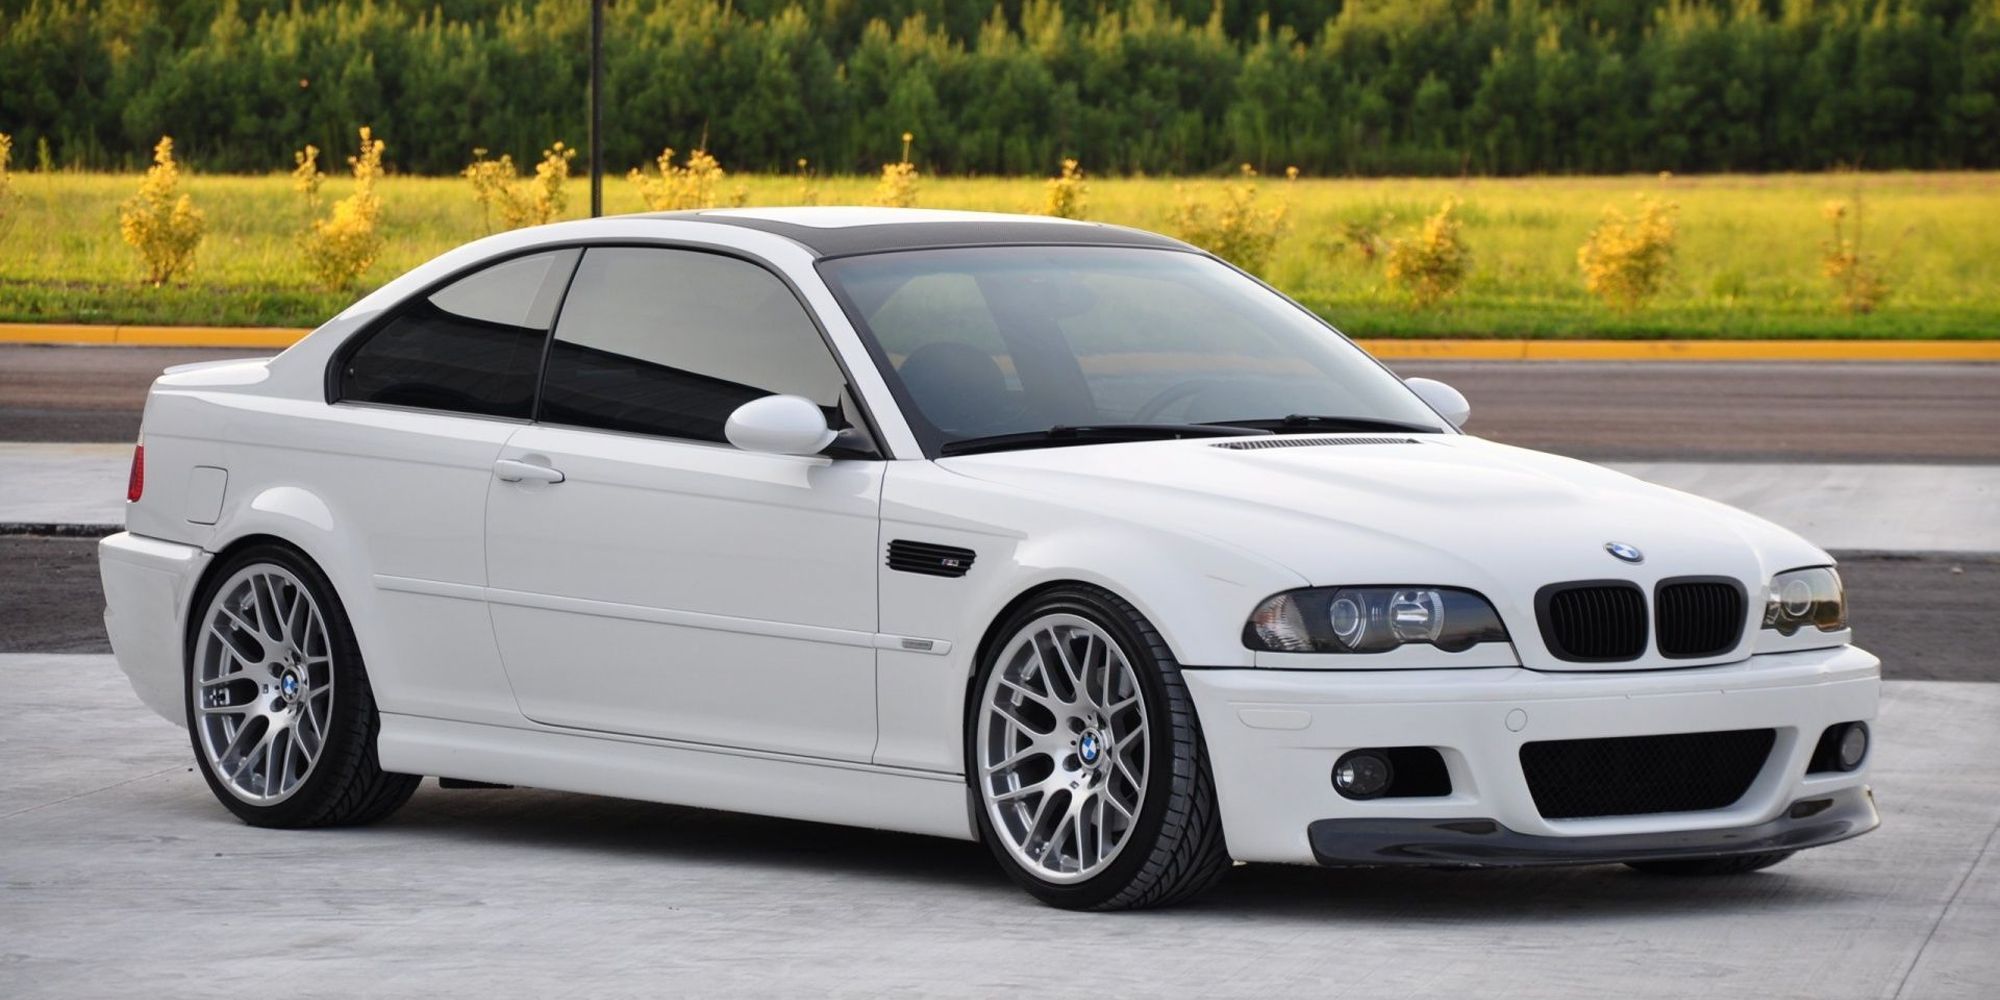 Front 3/4 of the M3 CSL in white